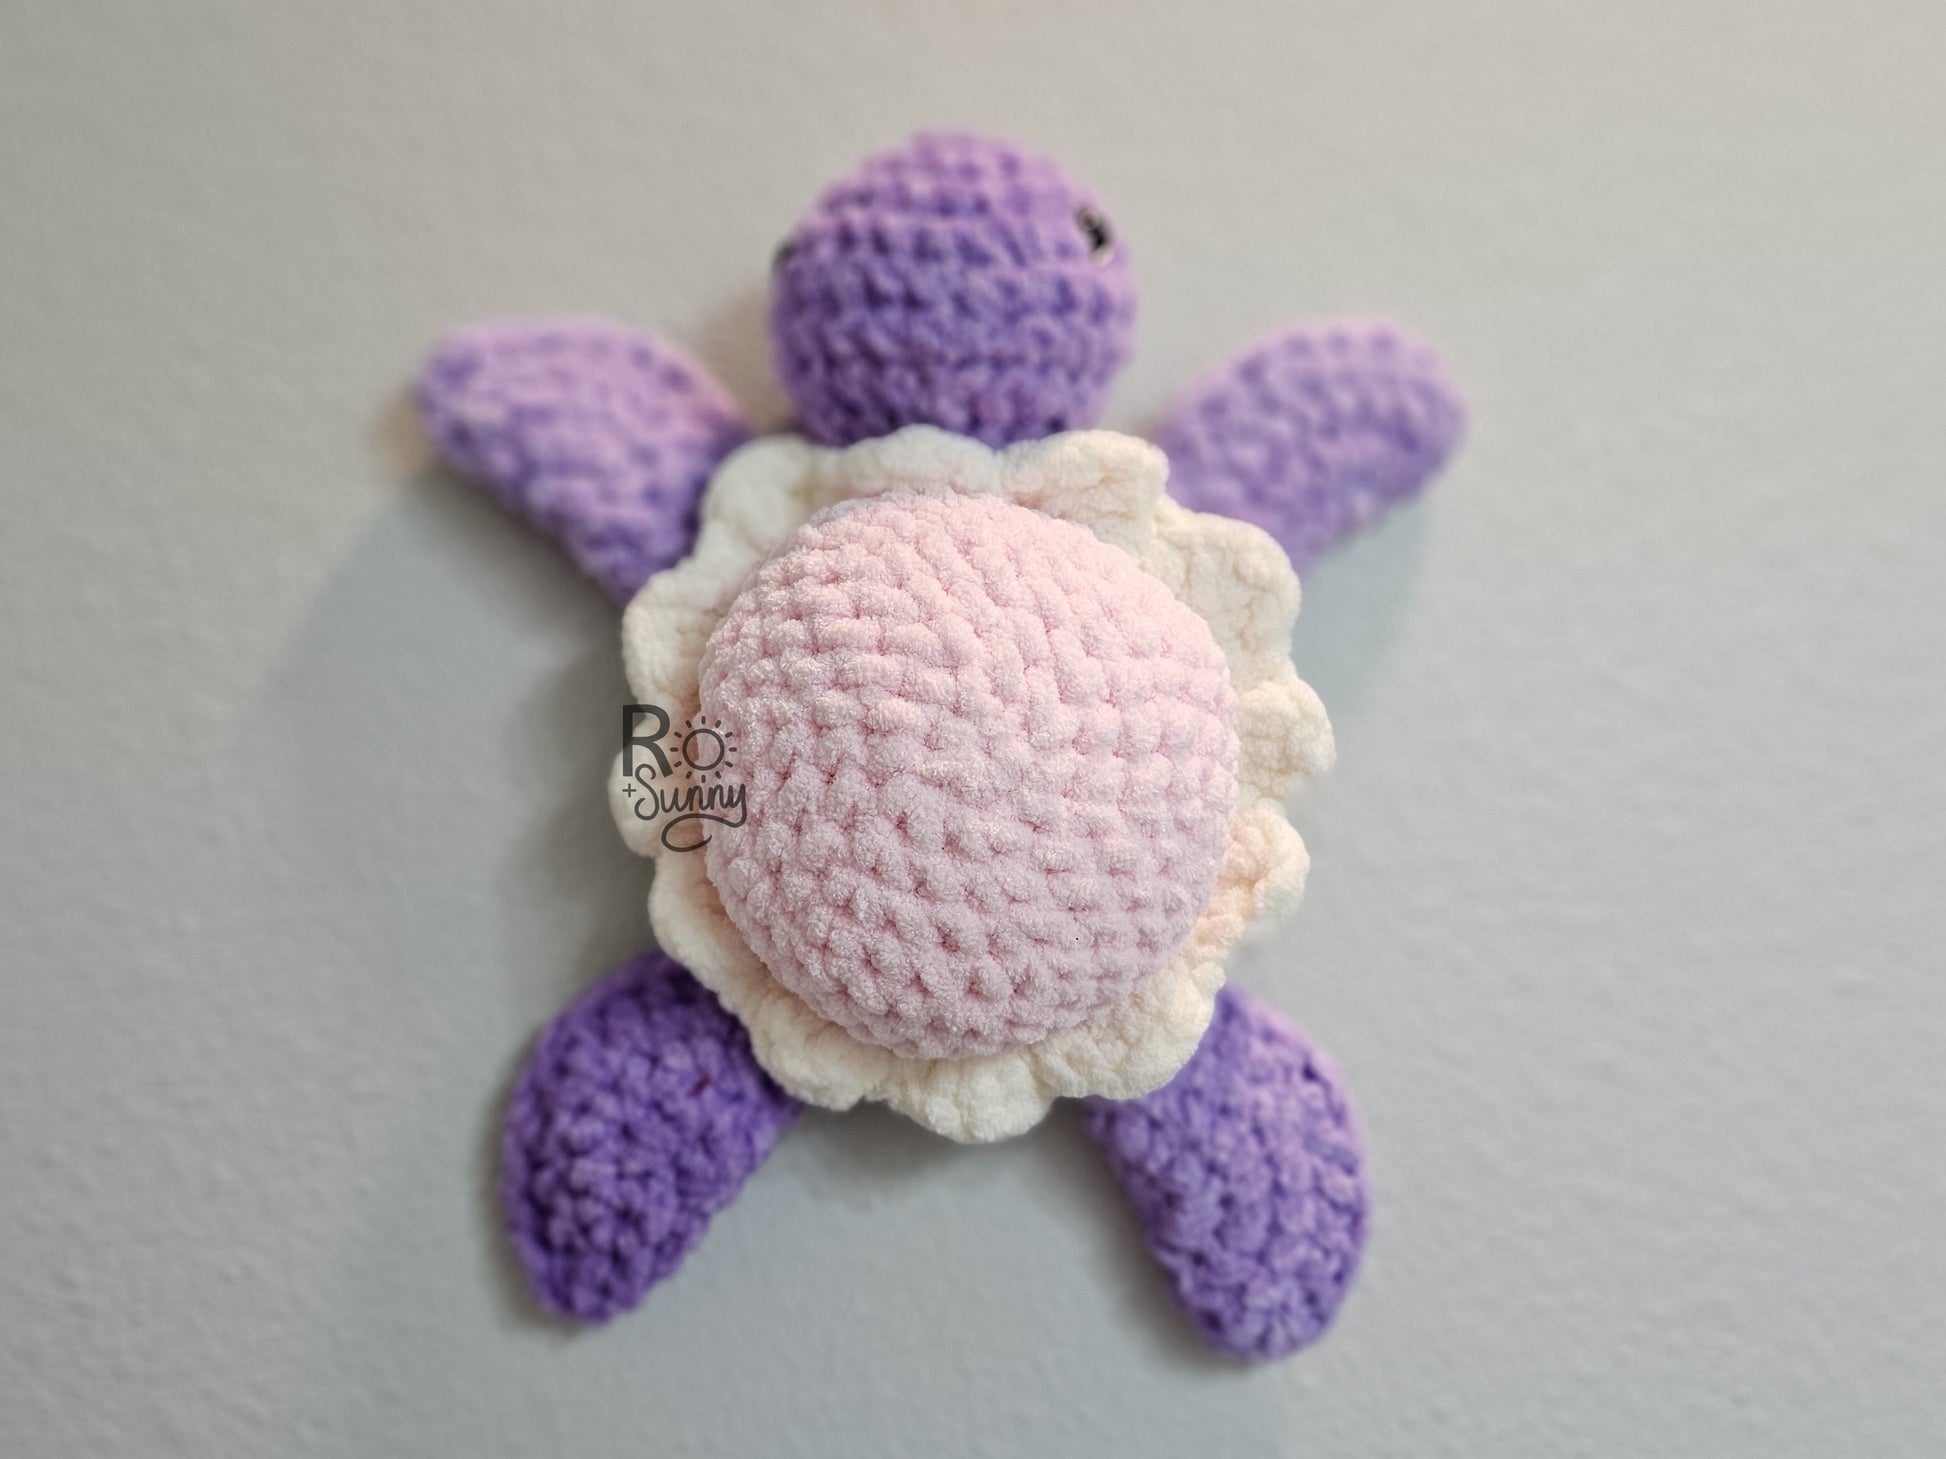 Cotton Candy, Overhead, Lying Flat  - Crochet sea turtle with a purple body and light pink shell with that has a white ruffle. The belly of the turtle is a light teal color. 